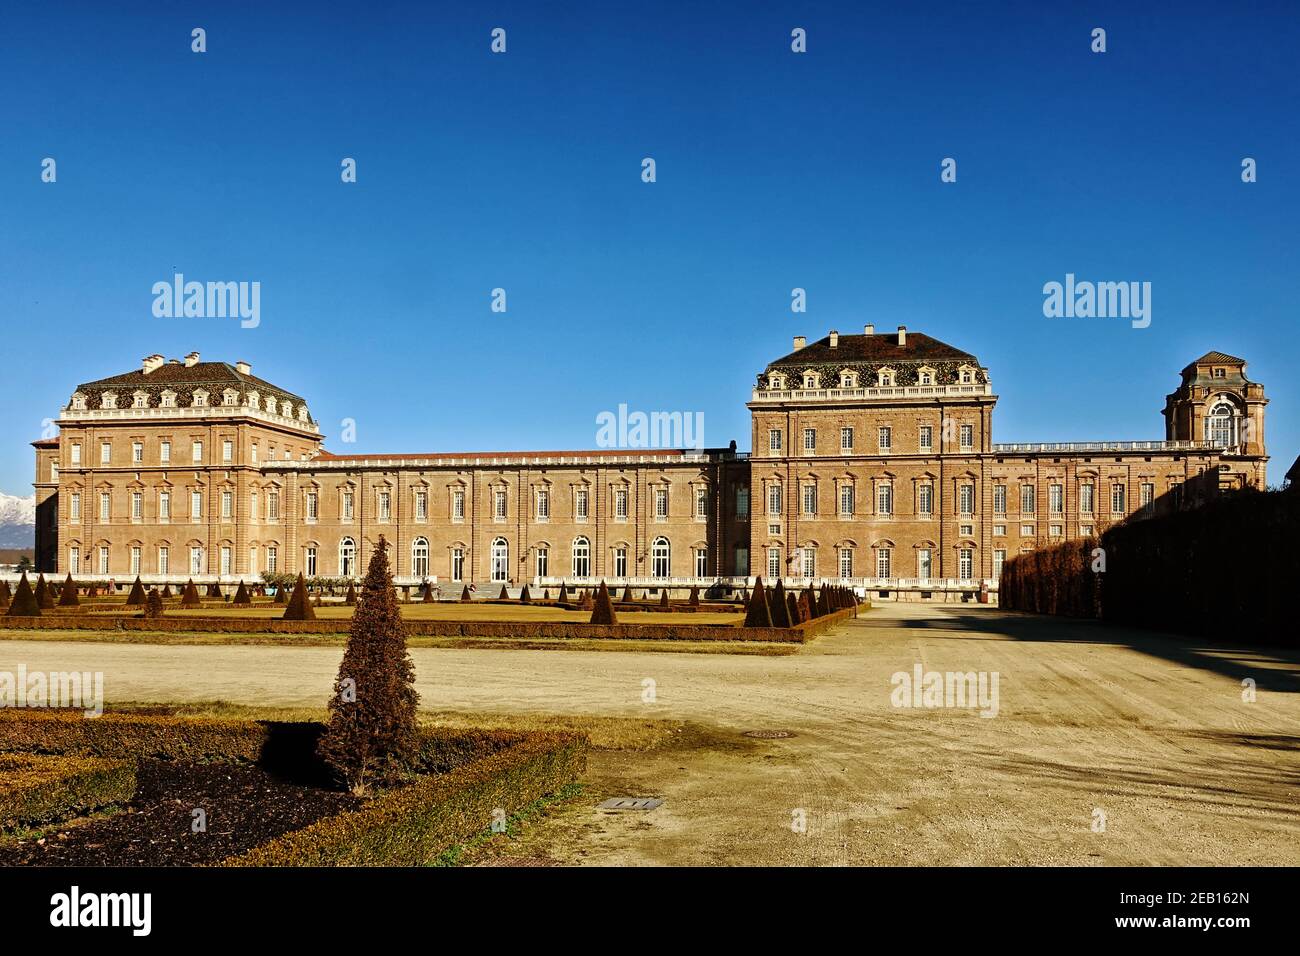 The Palace of Venaria Reale - Royal residence of Savoy. Turin, Italy   . Stock Photo